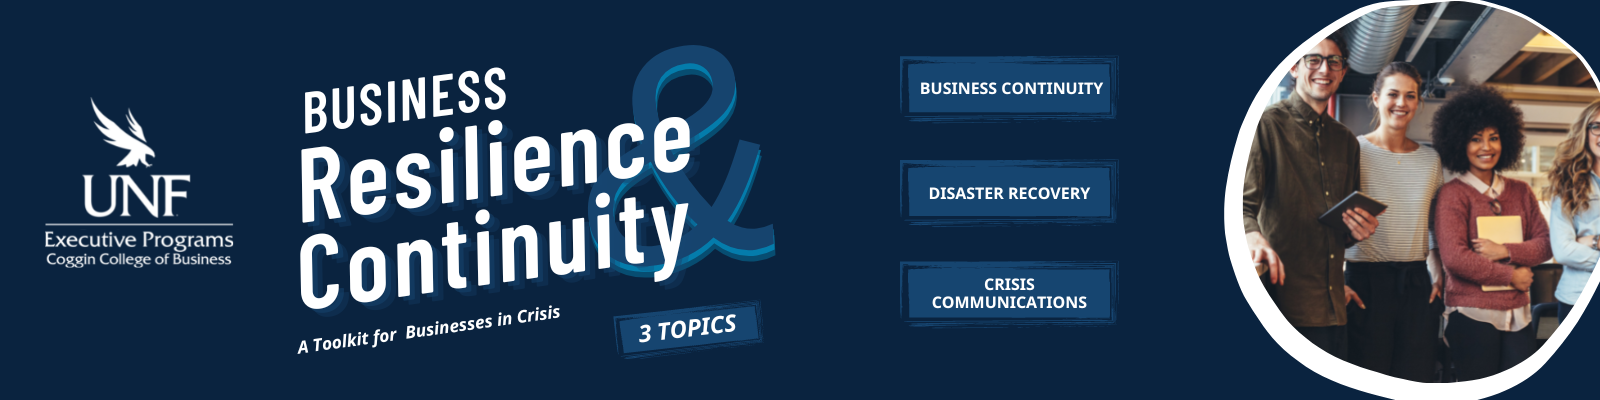 Business Resilience and Continuity Program